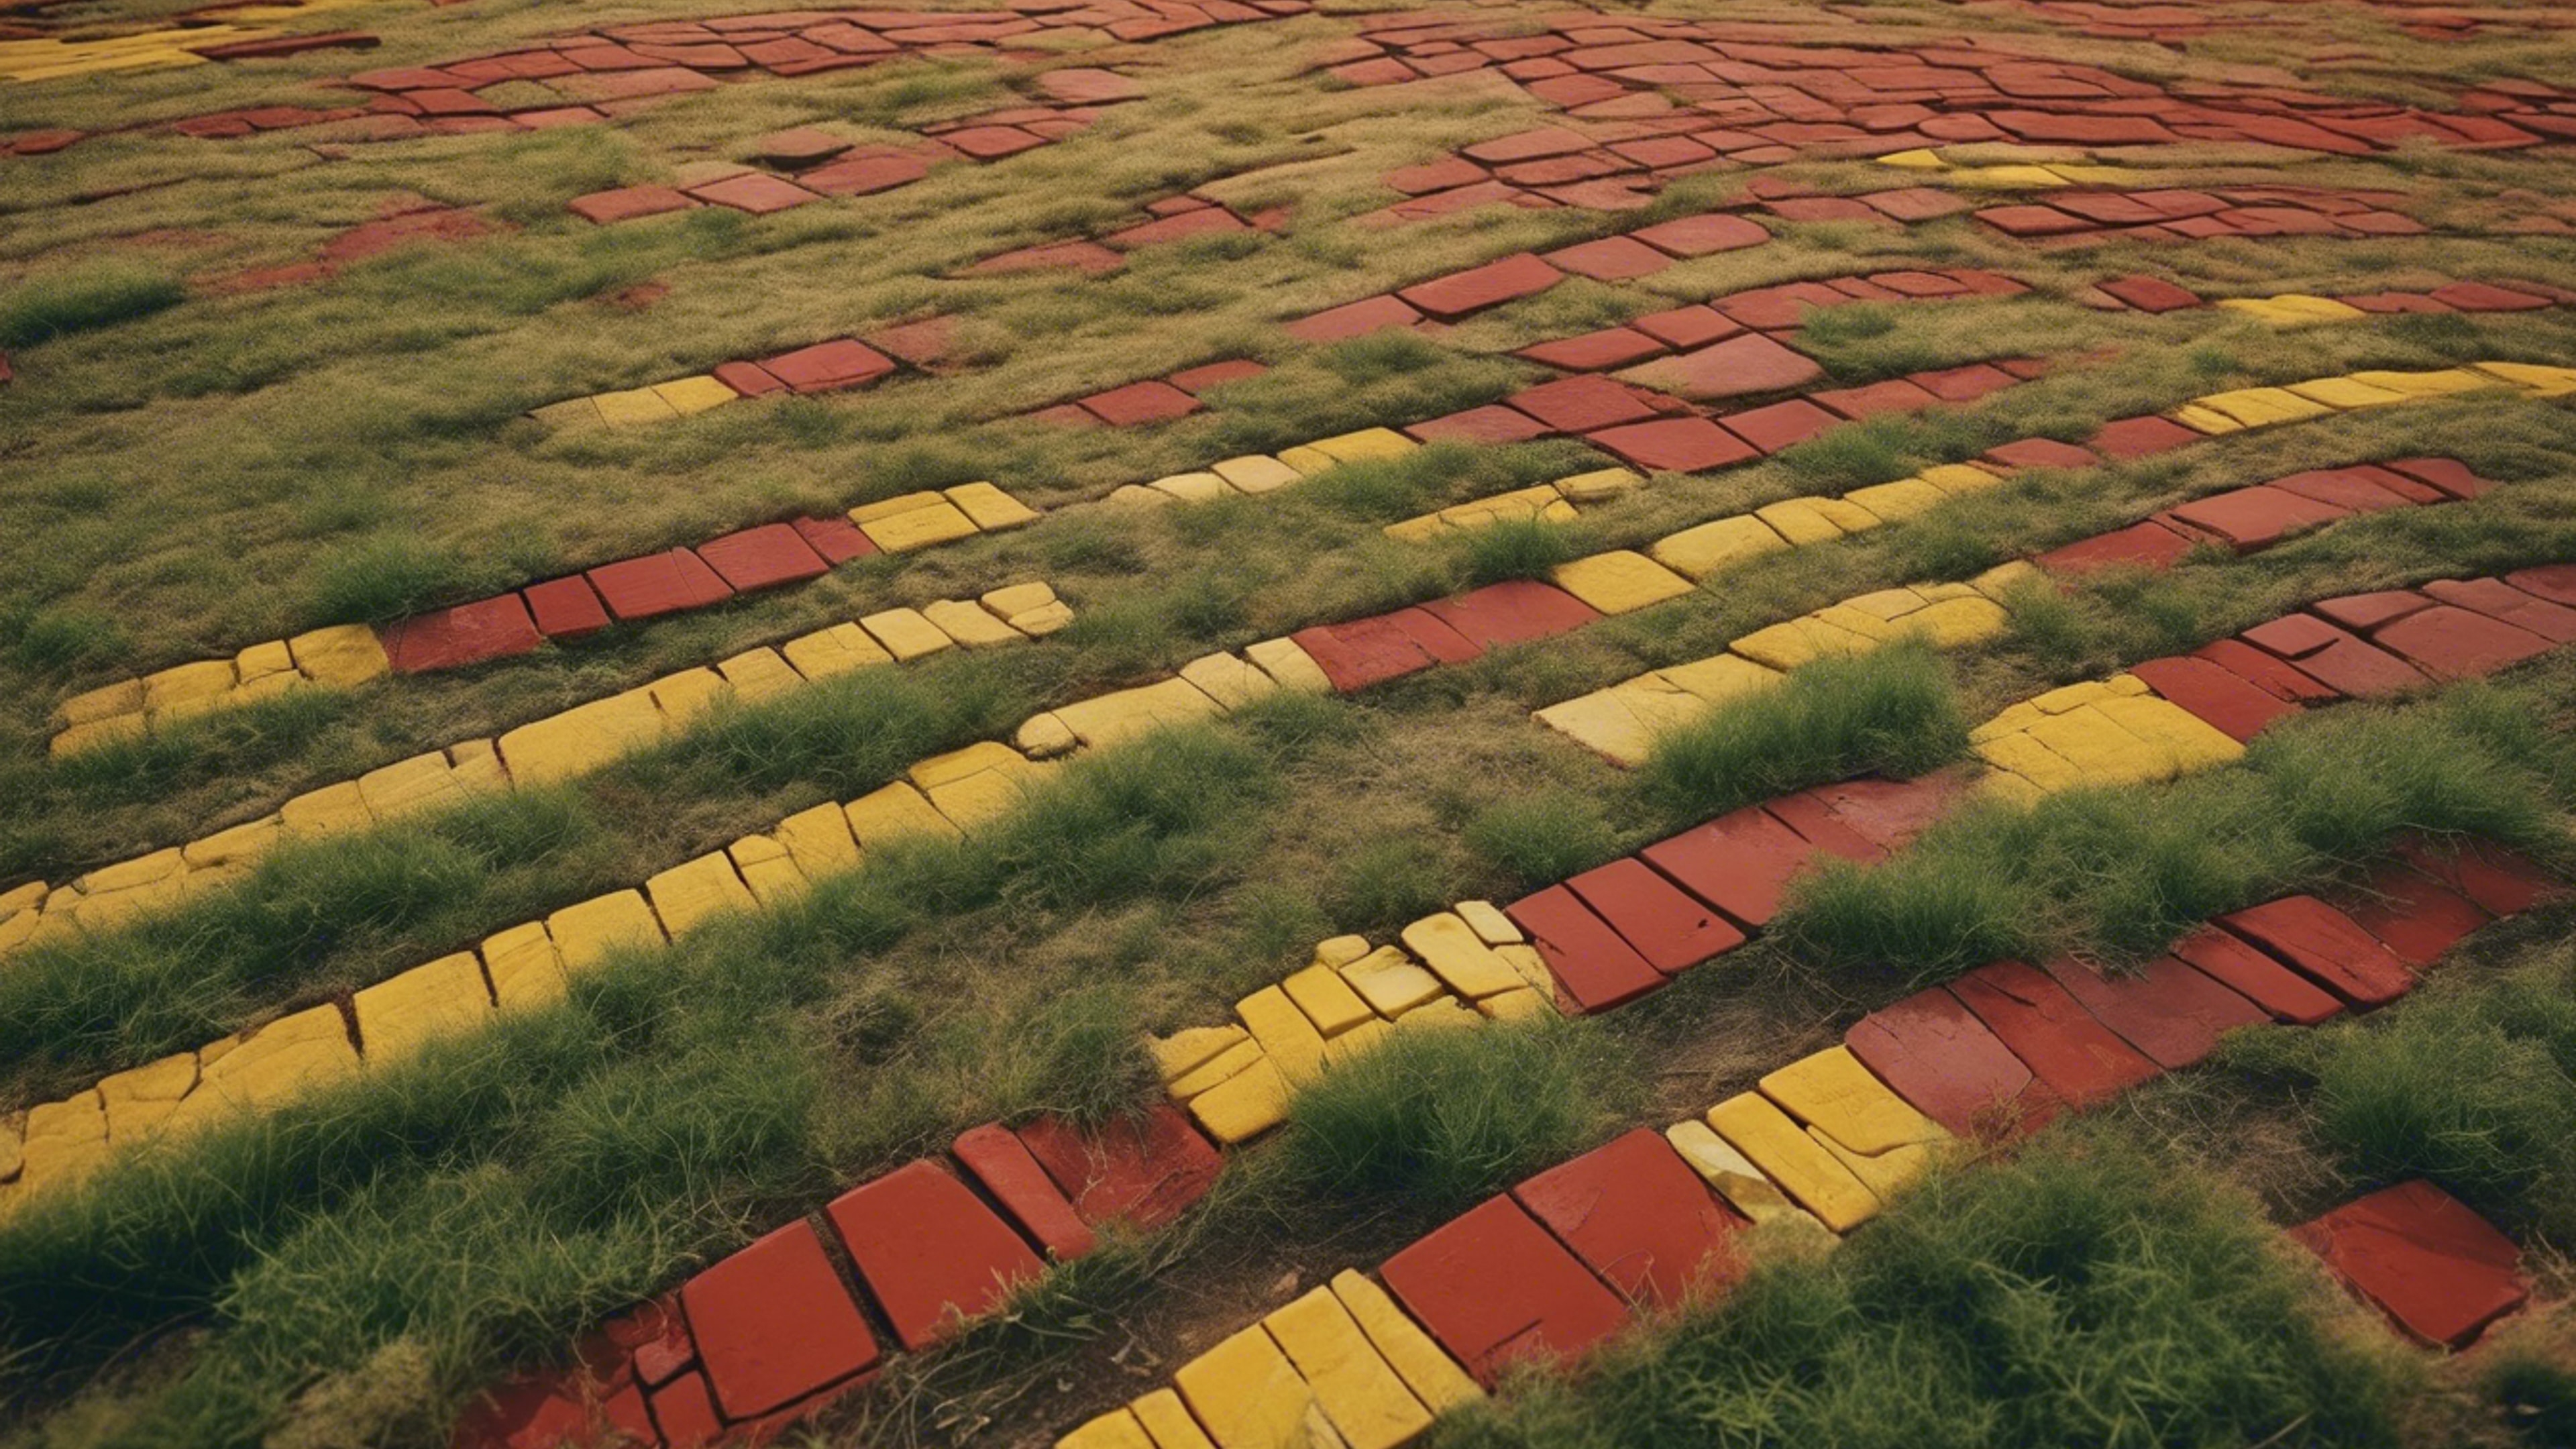 A bird's eye view of a red and yellow brick road weaving through a meadow. Tapetai[b665fbc055ed4704af98]